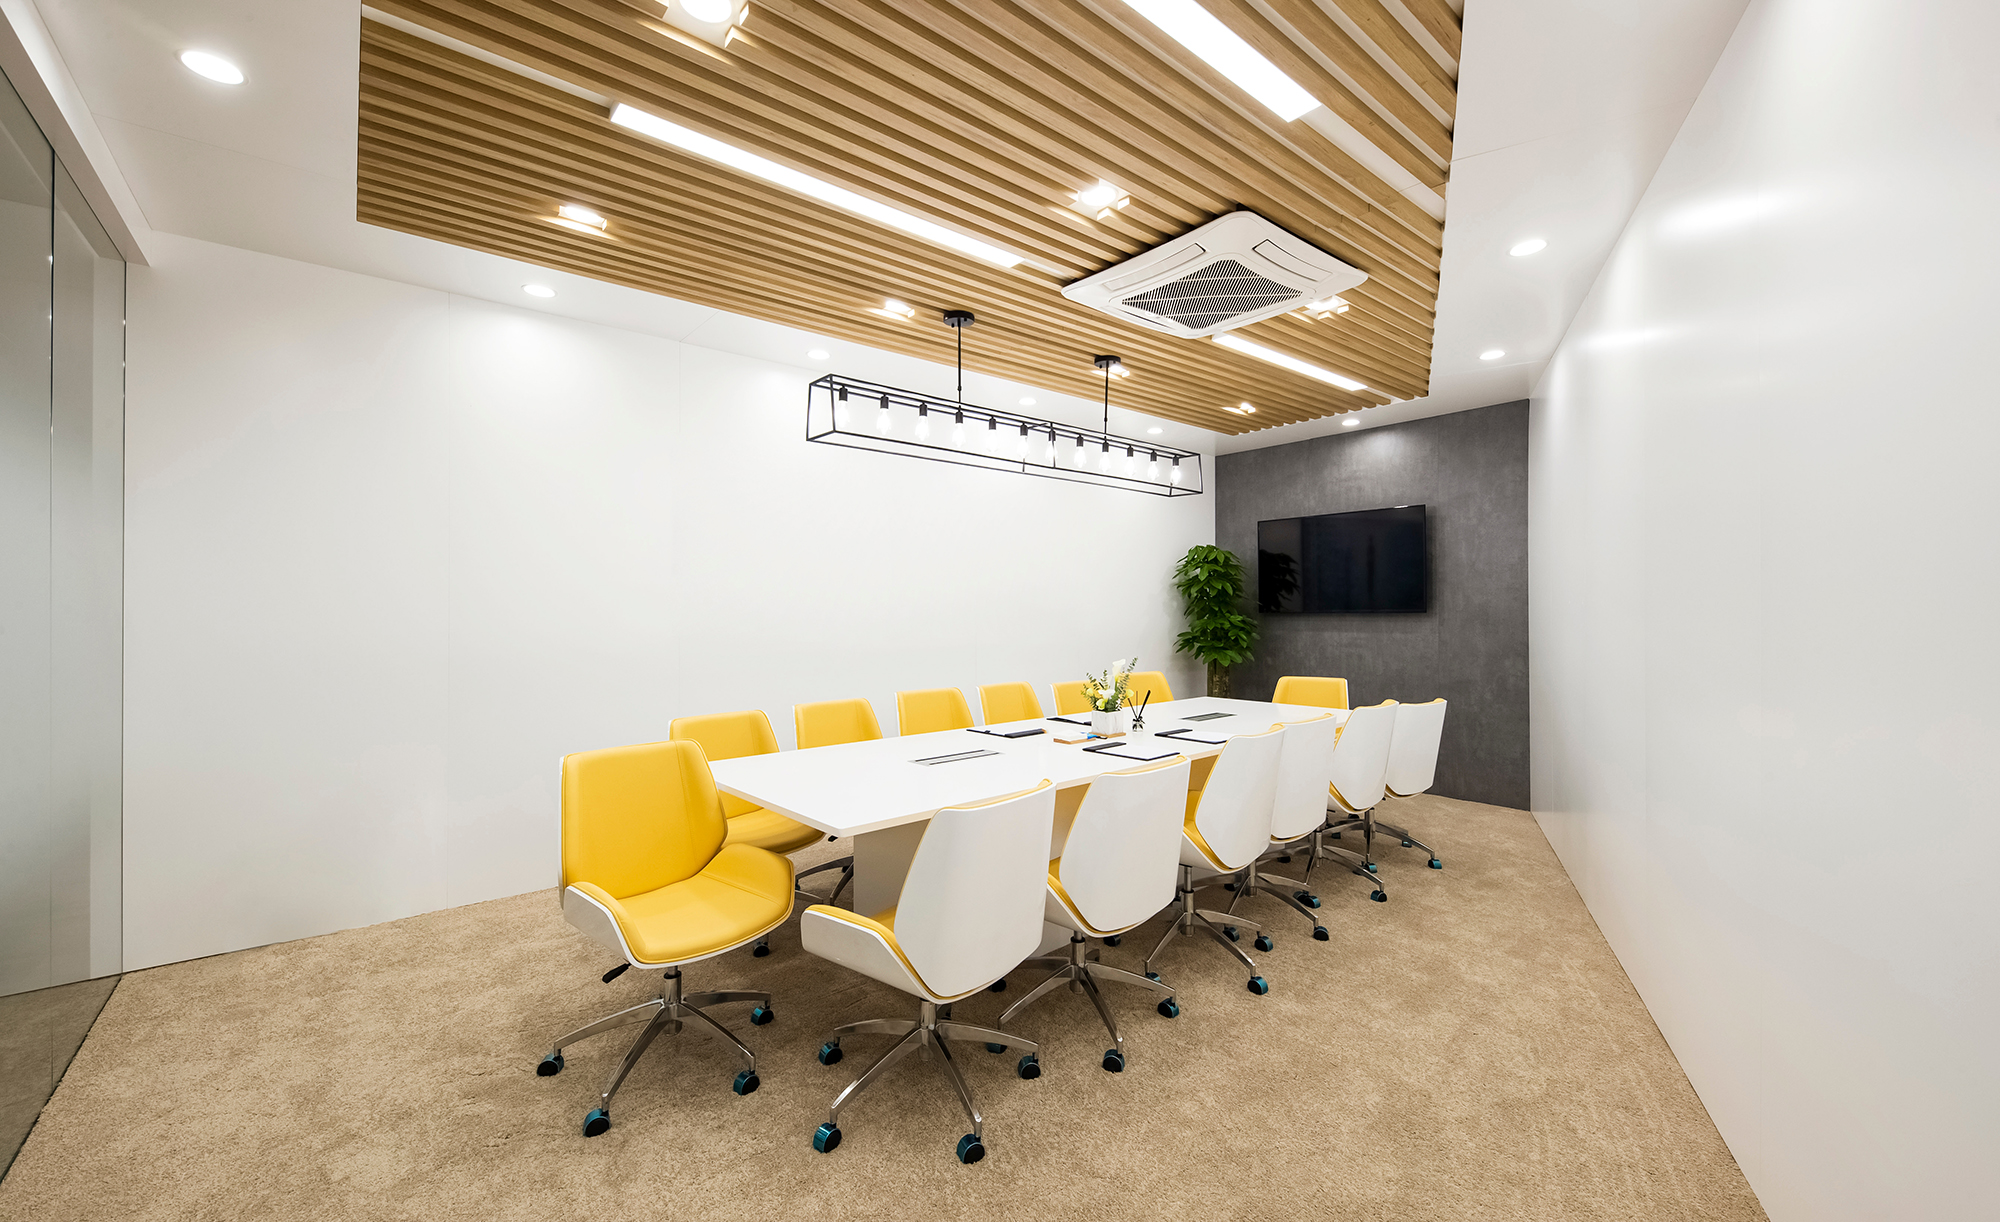 Office conference room with painted white walls and stained wood ceiling